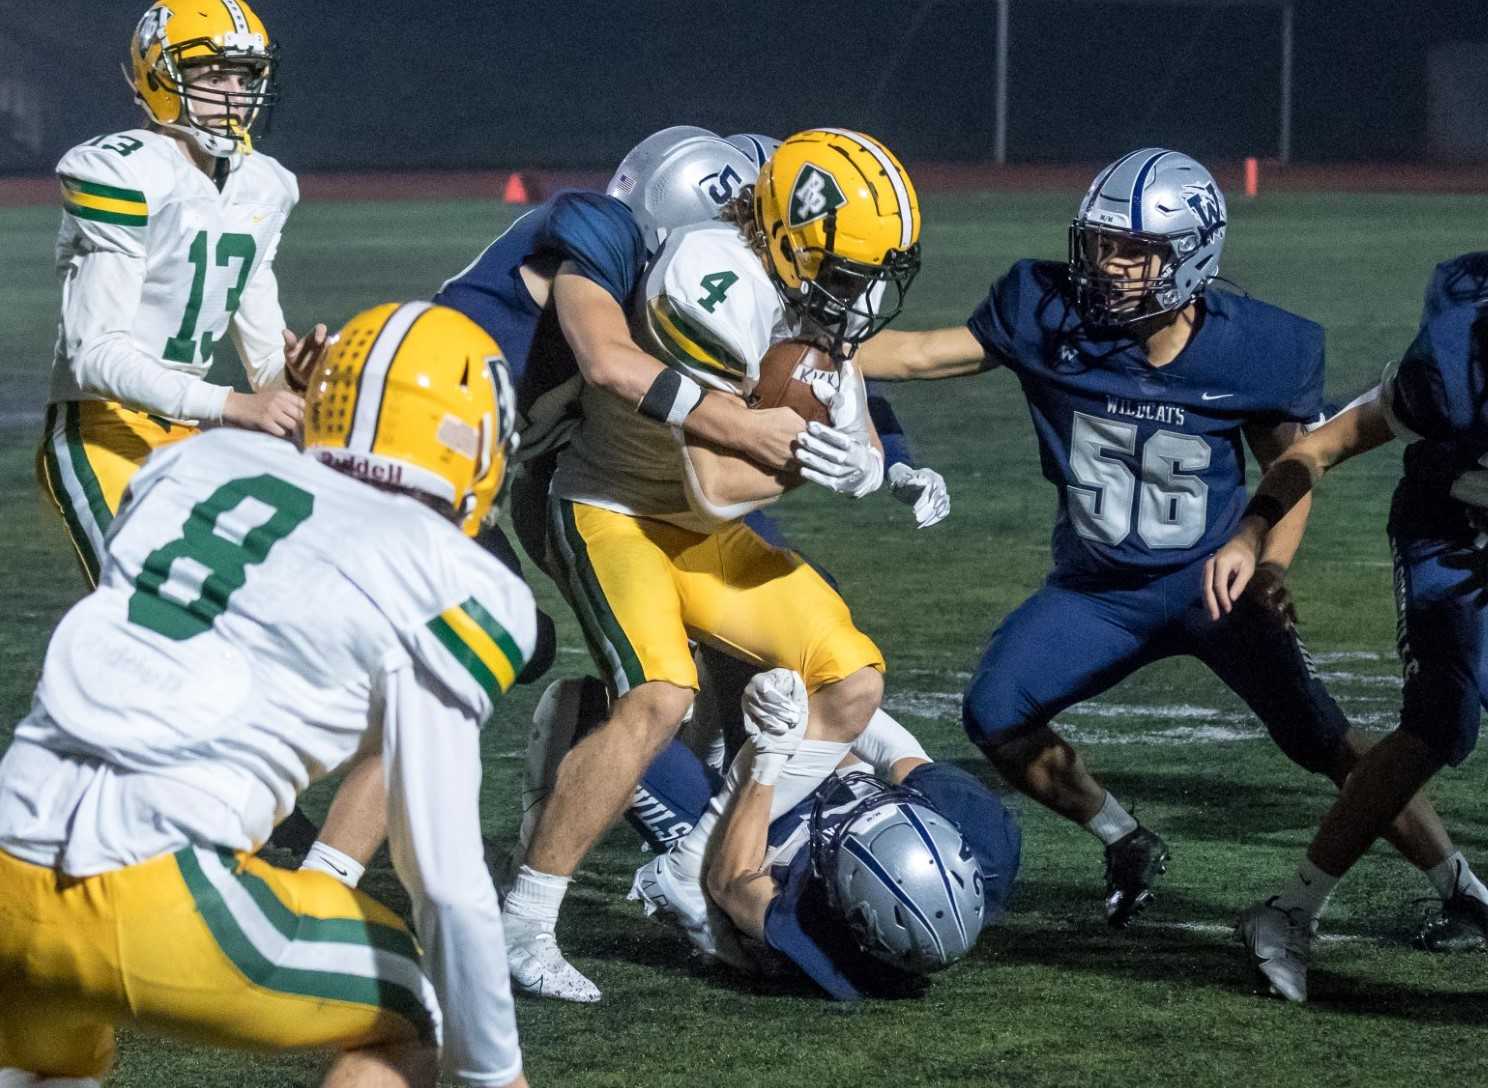 Putnam's Tyler Creswick (4) fights for yards in a 5A NWOC game at Wilsonville last season. (Photo by Greg Artman)